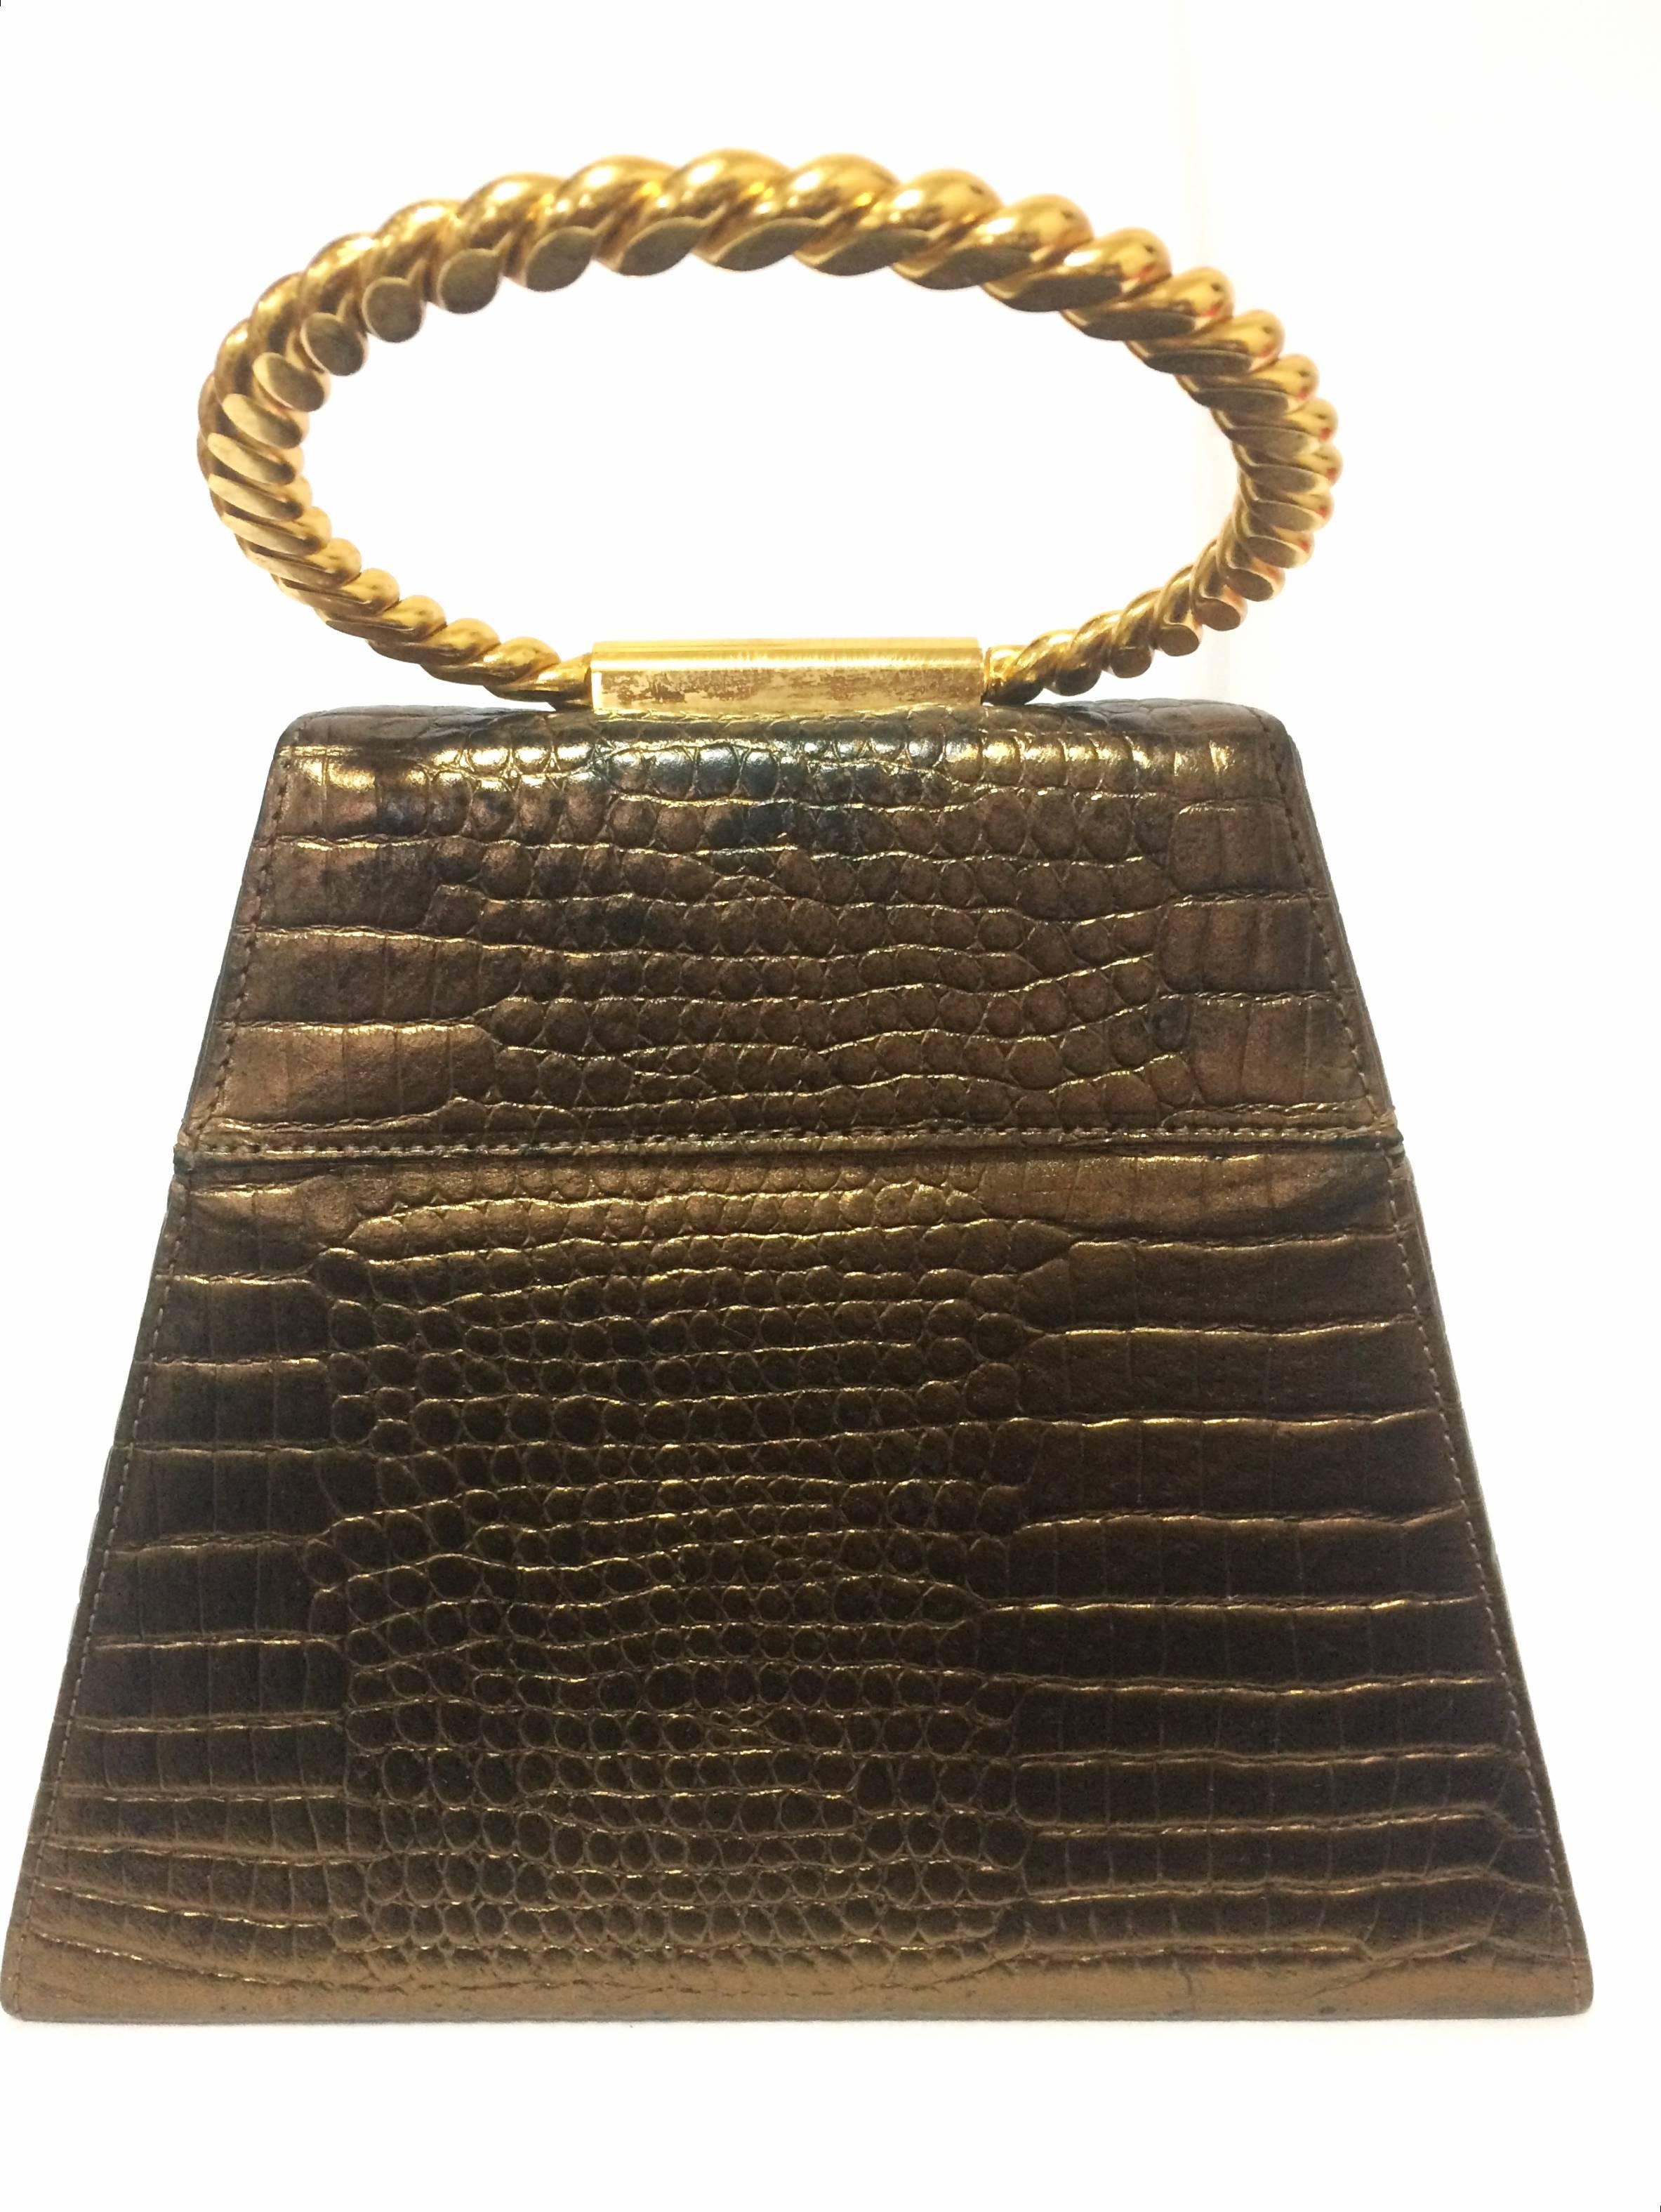 1990s. Vintage Charles Jourdan bronze gold croc embossed leather triangle shape vanity bag with chain hoop handle.

Introducing another gorgeous piece for party use from Charles Jourdan back in the 90's. 
Bronze gold foil finish croc-embossed